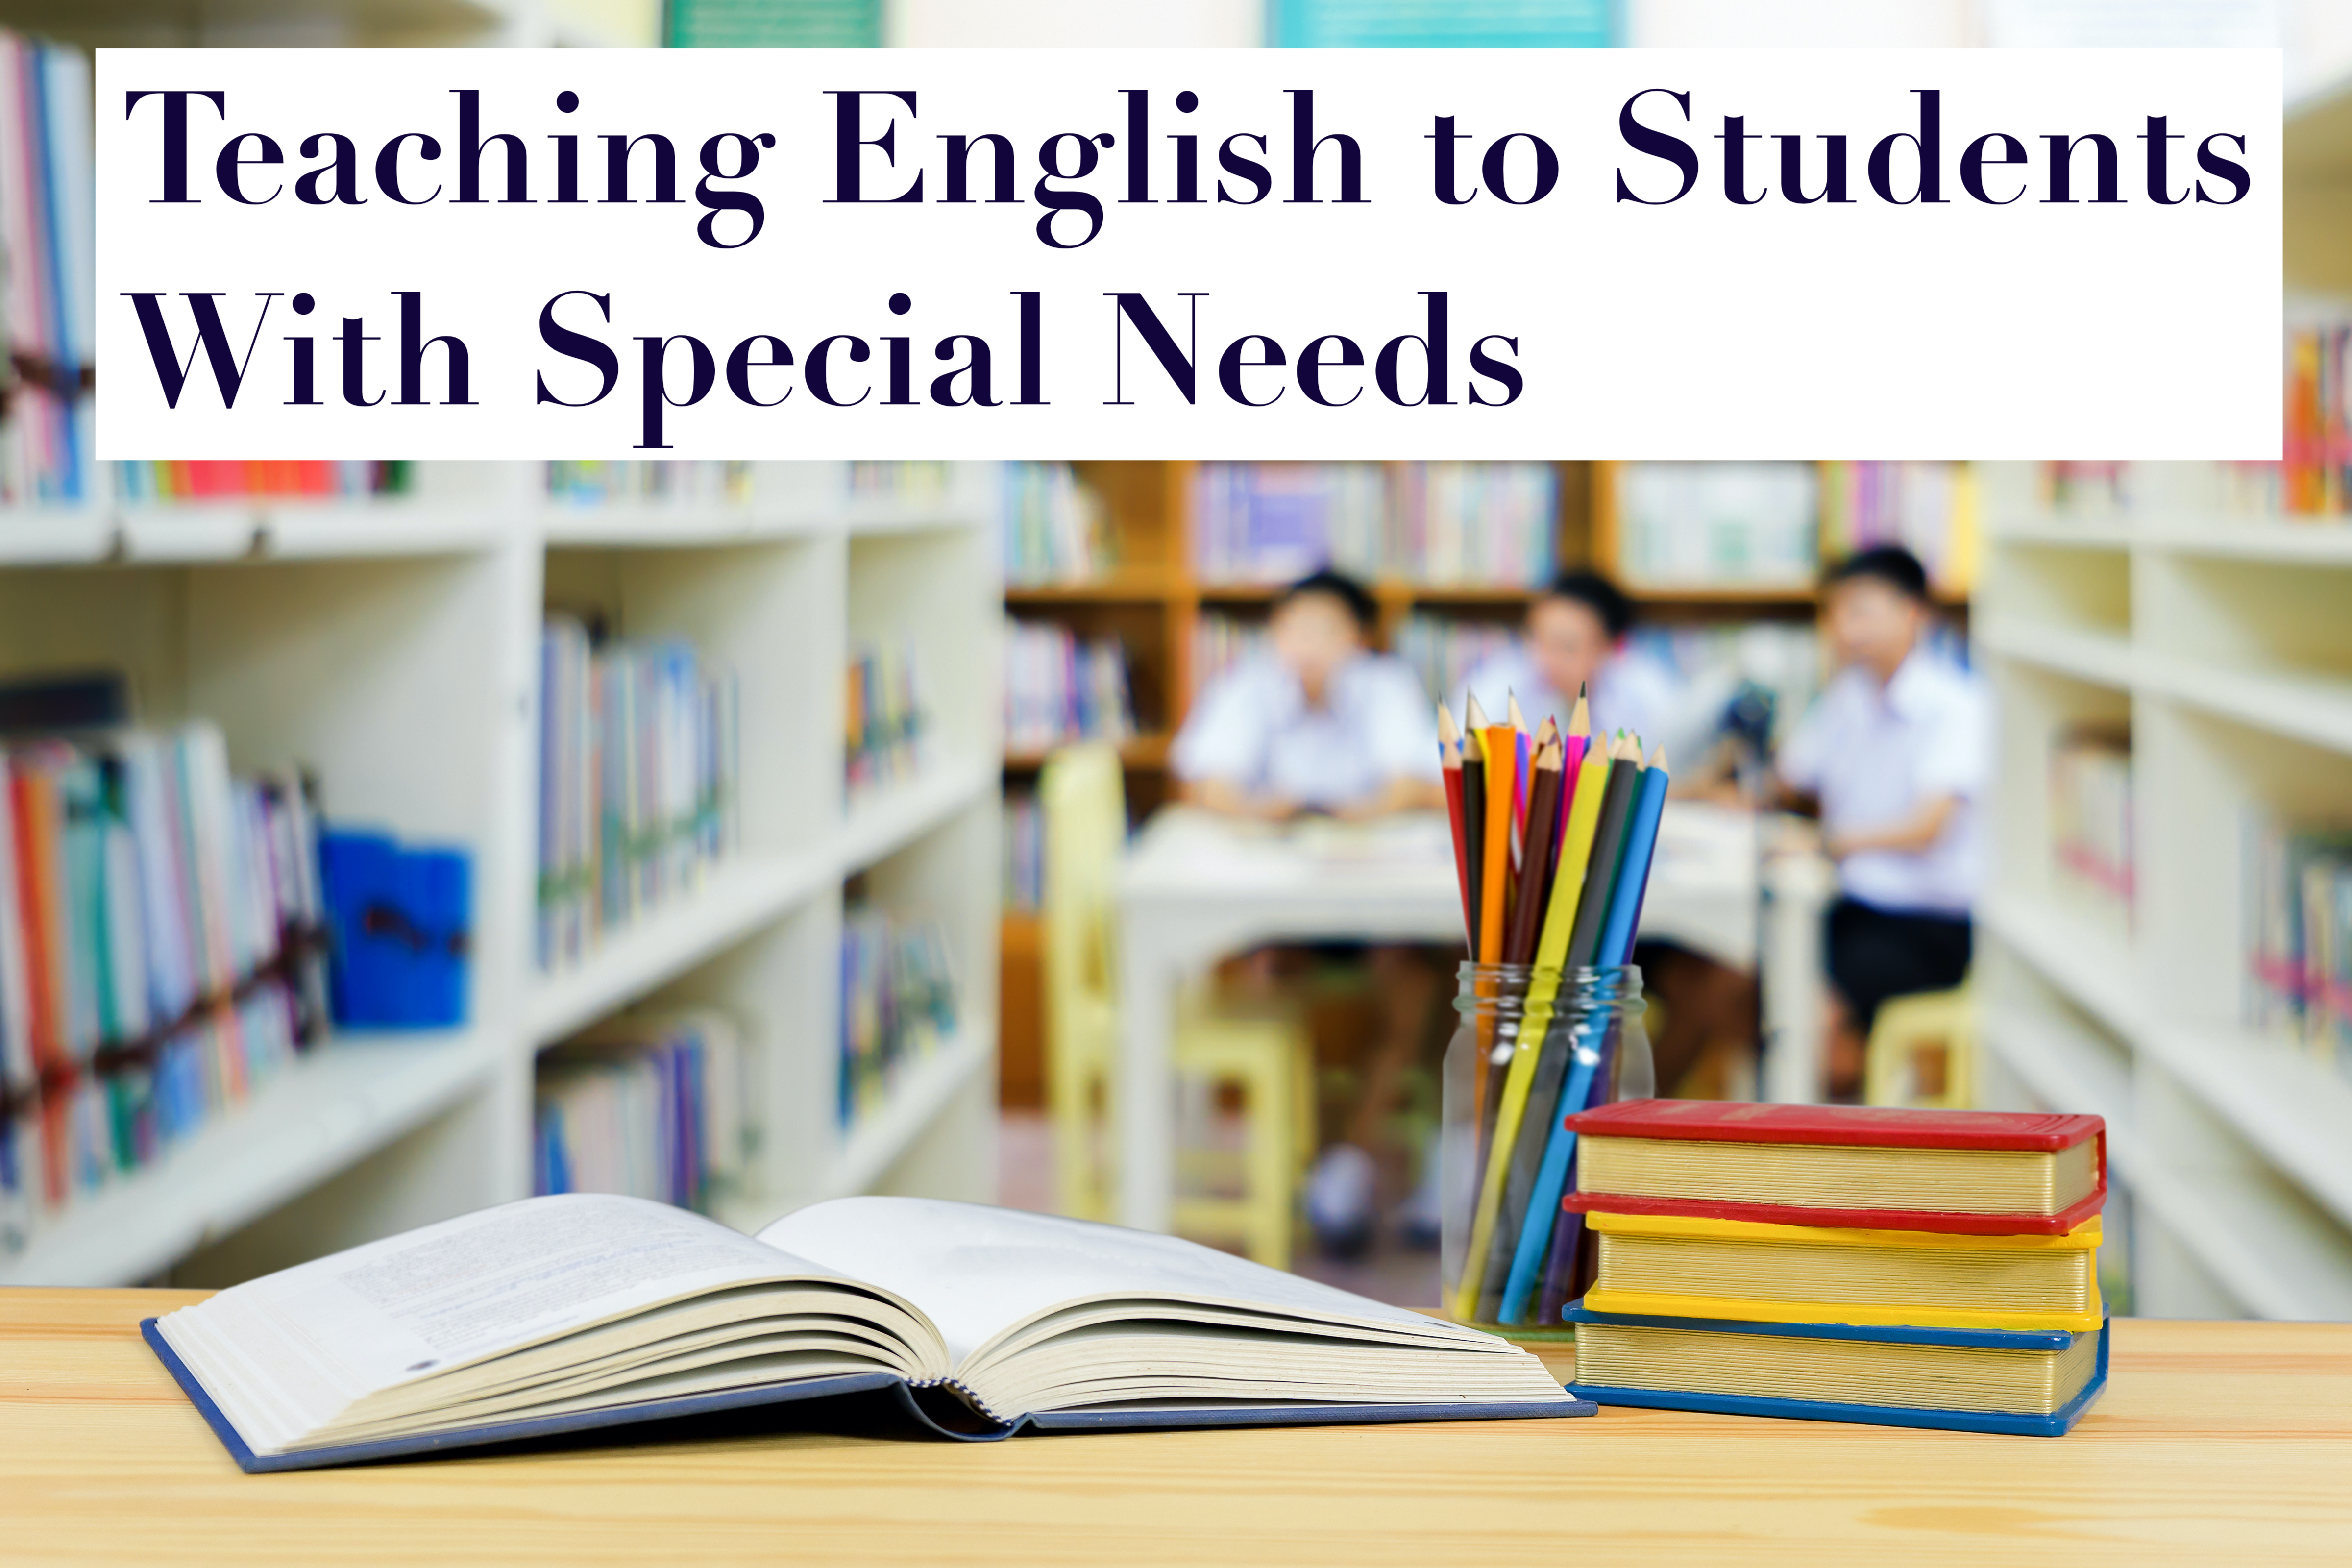 Teaching English to Students with Special Needs 2021